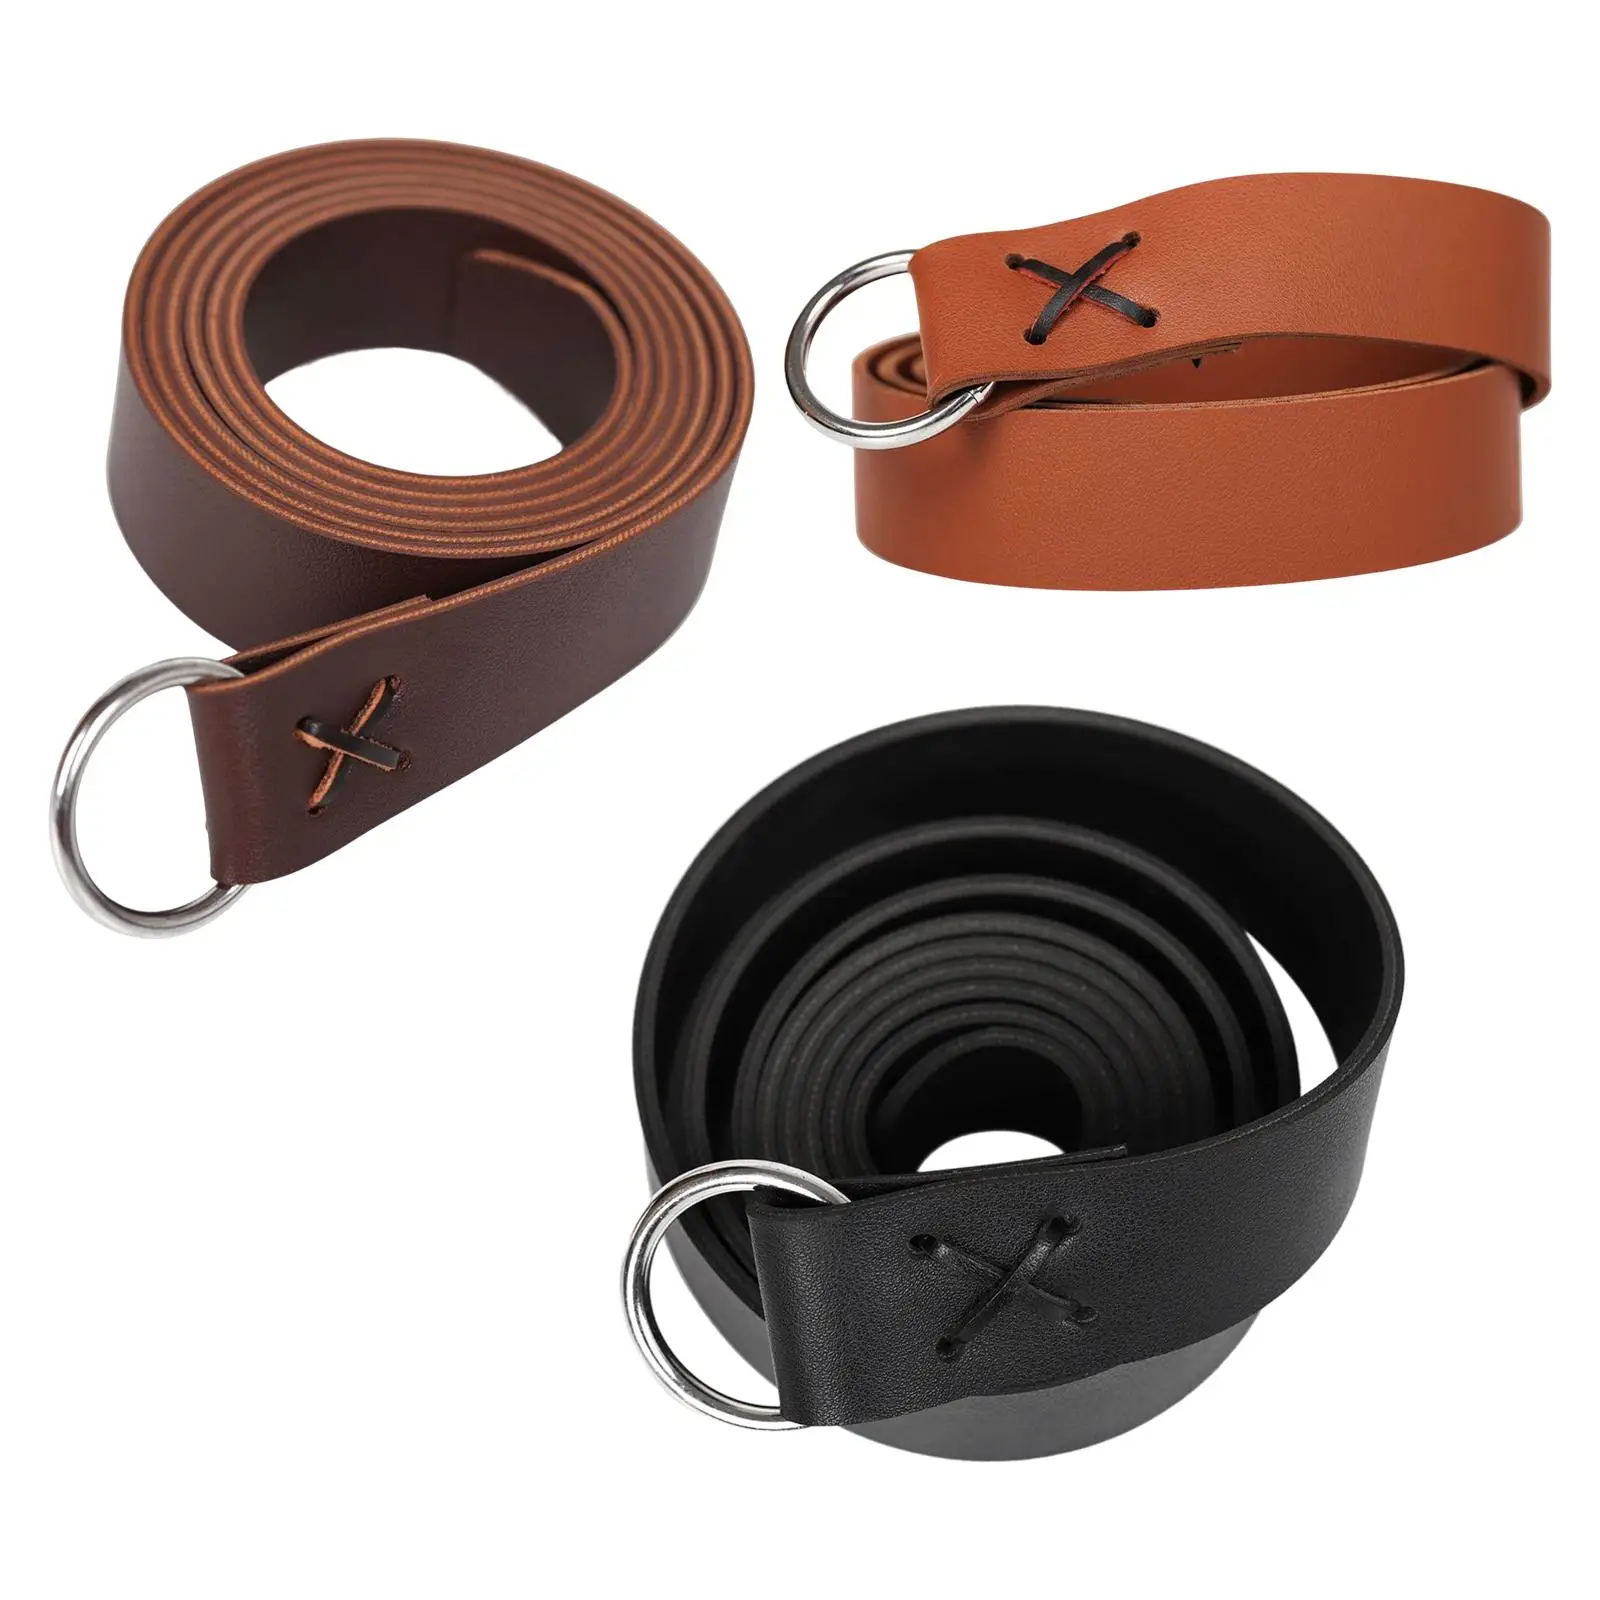 Leather Medieval Belt Costume Accessories Photo Props Waistband Viking Belt for Medieval Events Halloween Party Decoration